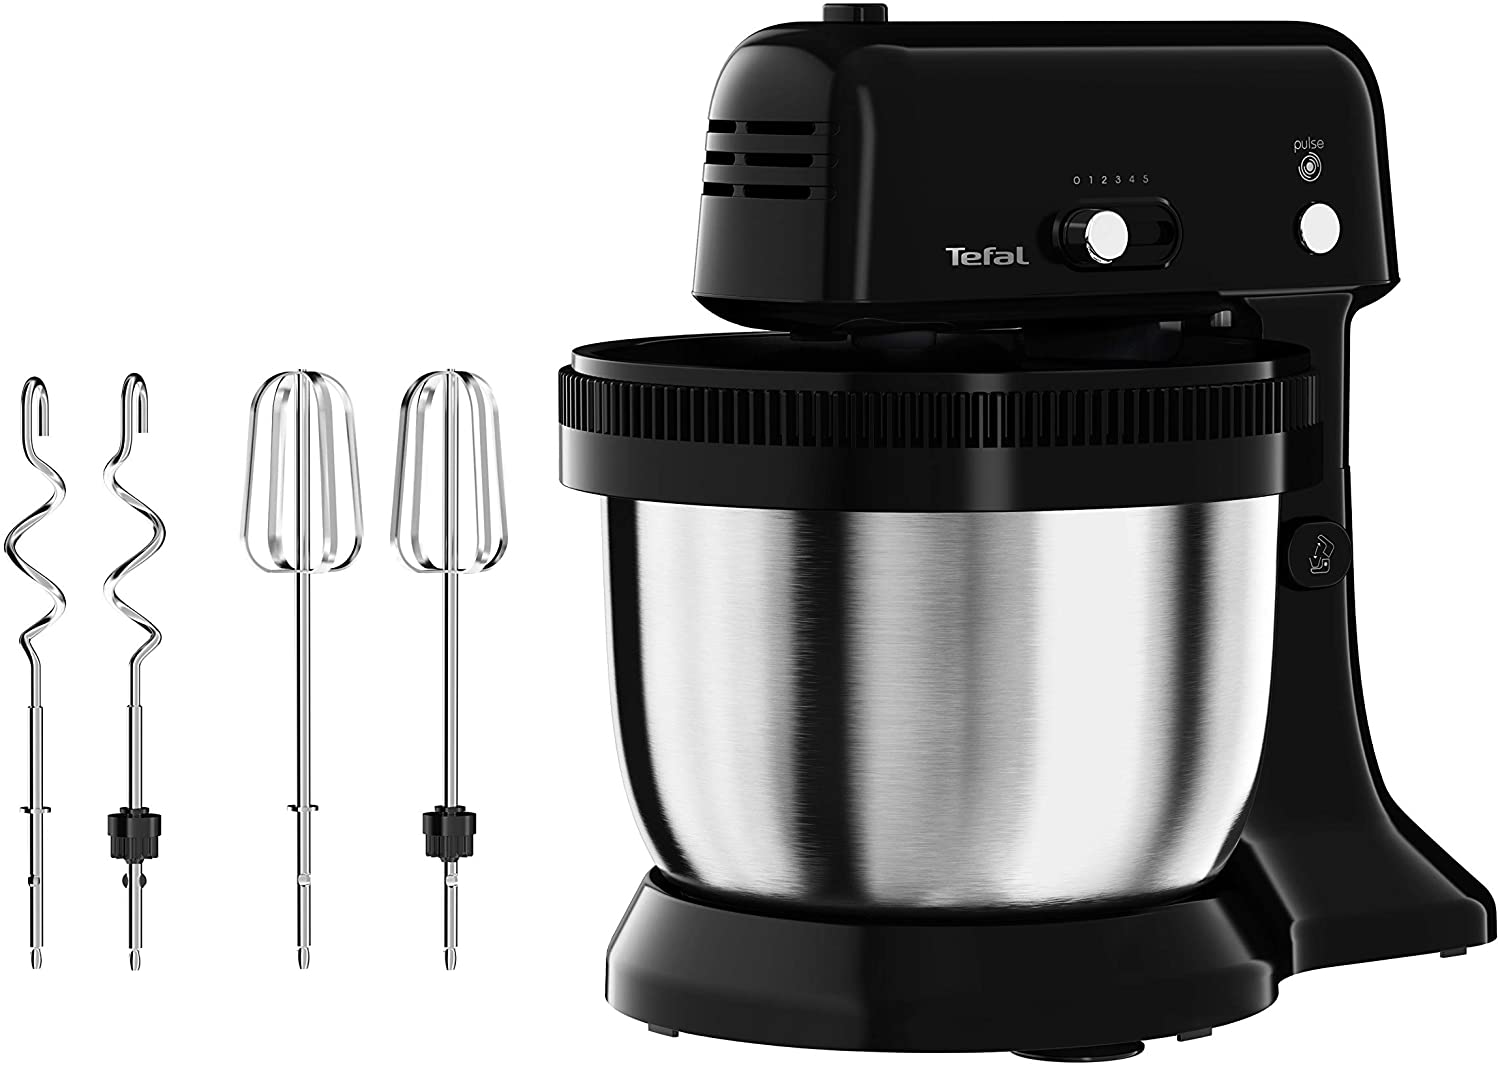 Tefal QB1108 Oh My Cake Food Processor | 300 Watt | Satellite Mixer | 4L Stainless Steel Bowl | Compact Size | 5 Speeds | Includes 2 Whisks, 2 Dough Hooks | Black